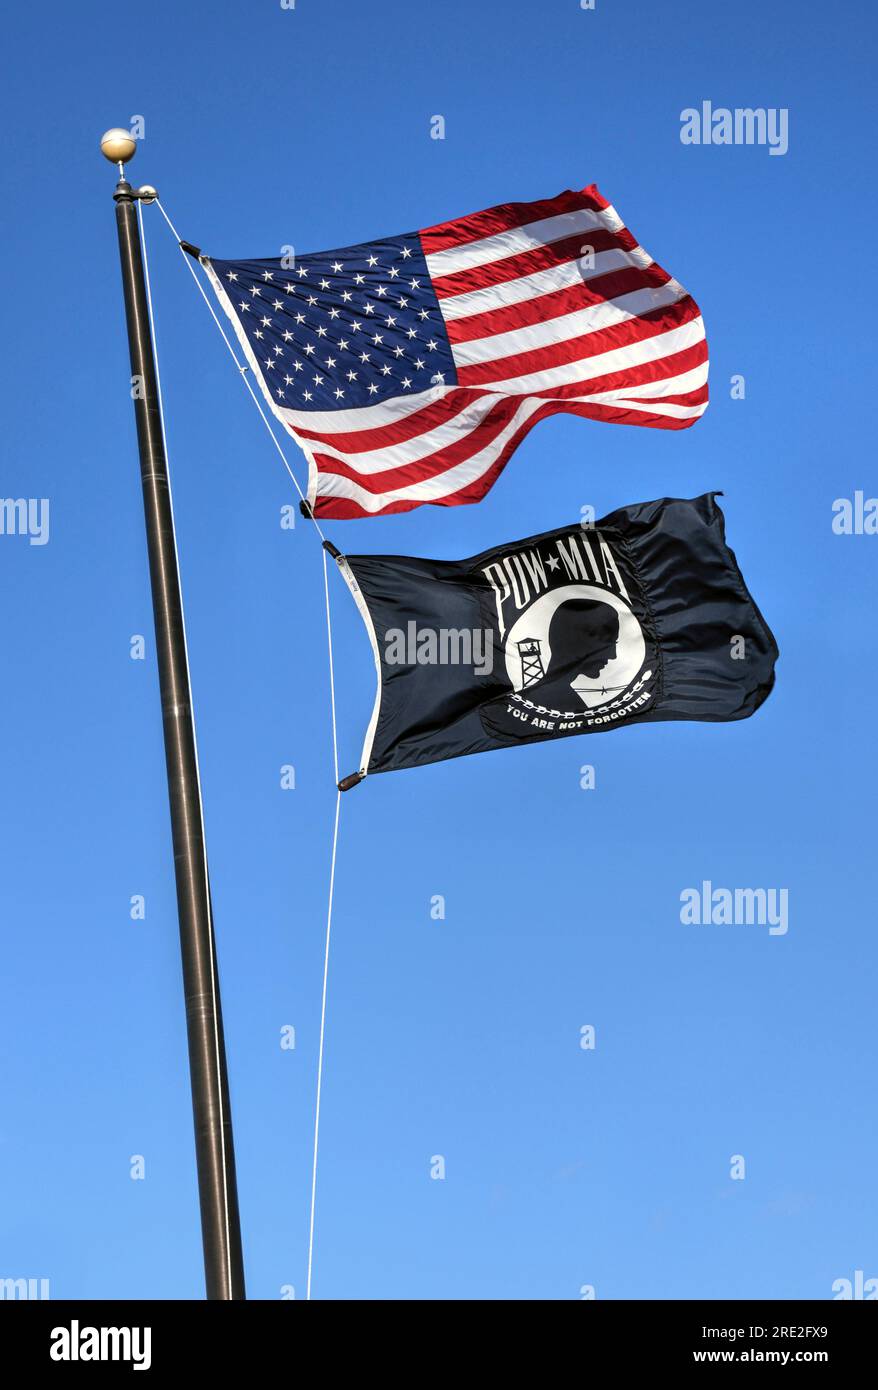 Willard, Missouri - February 21, 2016: The American Flag with the POW MIA Flag flying against a blue sky.  The POW MIA flag is a symbol of US military Stock Photo